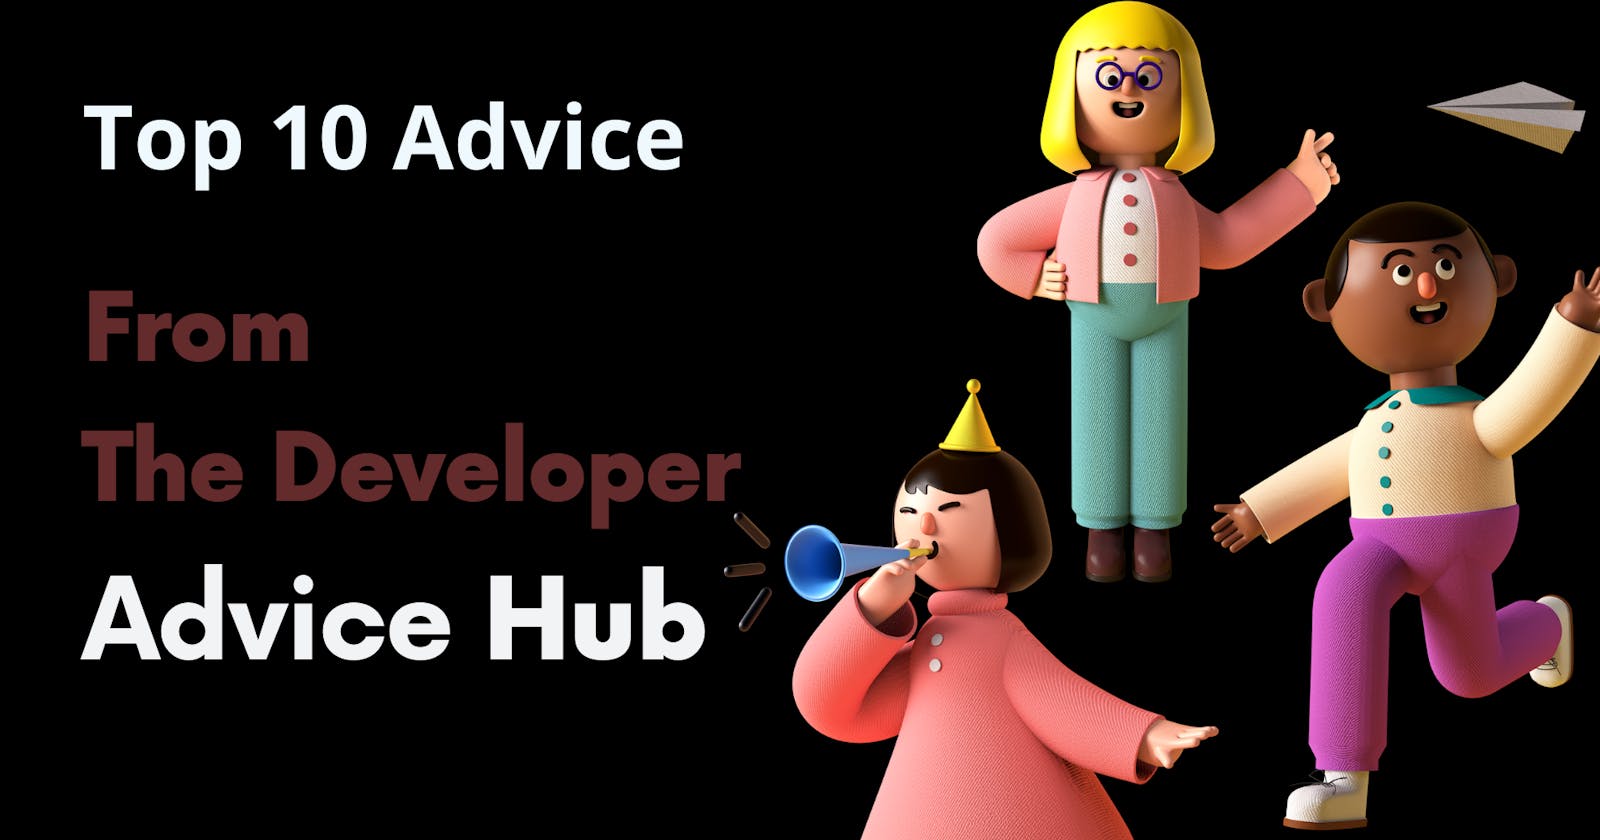 Top 10 Advice from The Developer Advice Hub